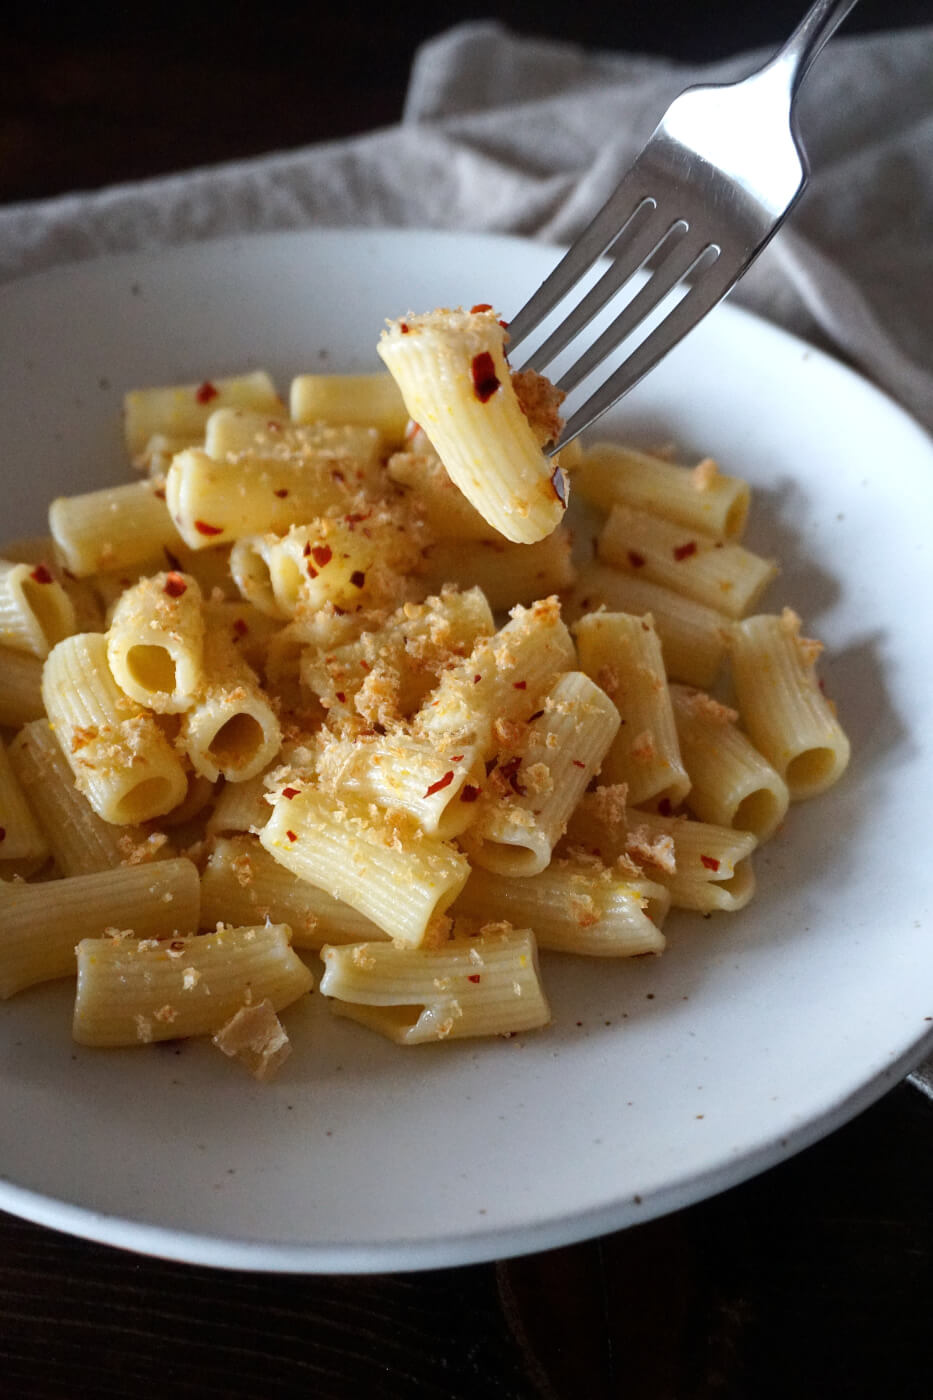 Pasta with breadcrumbs and red pepper flakes